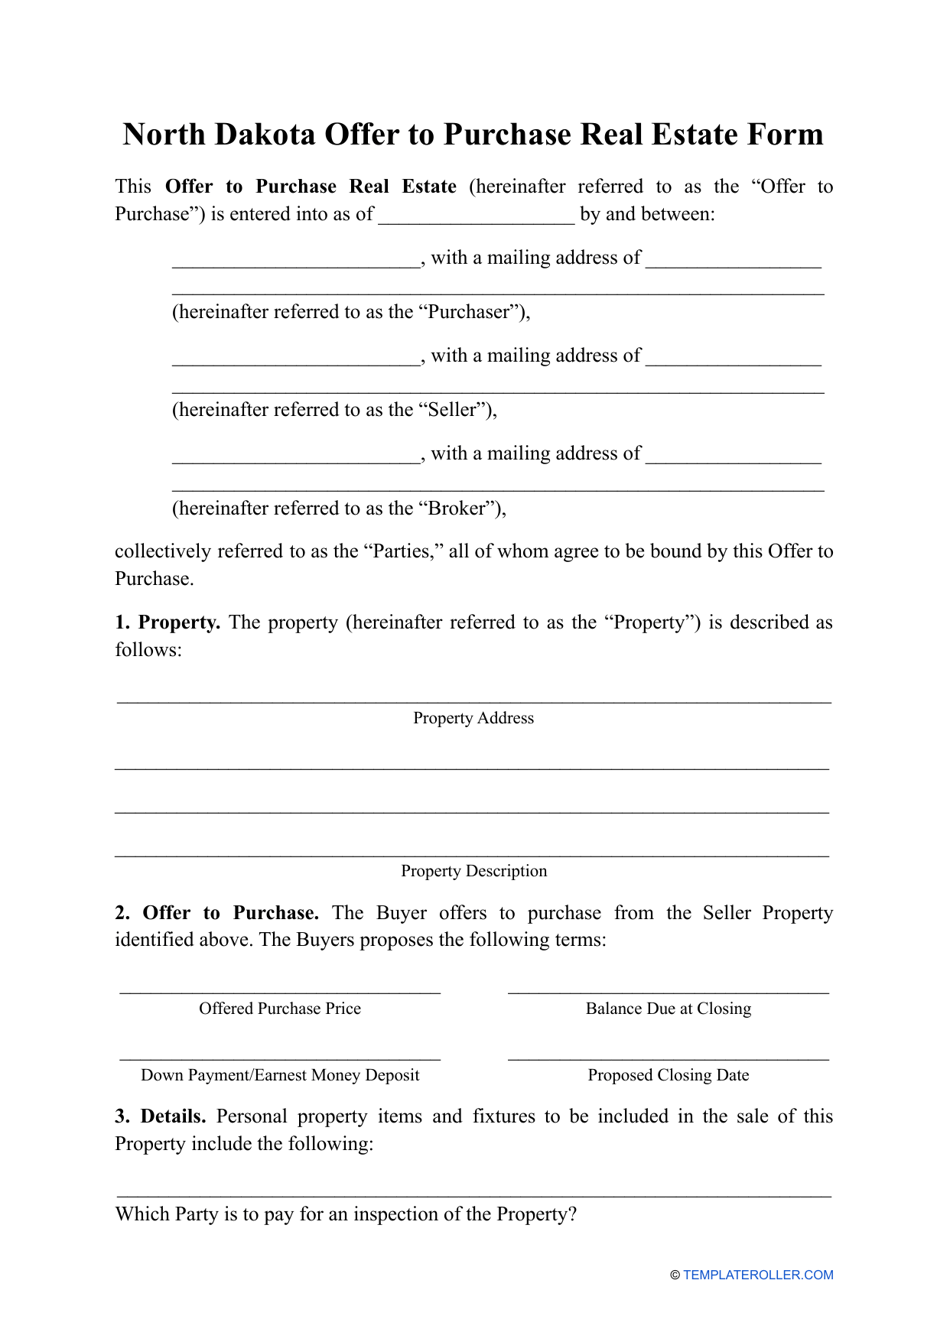 Offer to Purchase Real Estate Form - North Dakota, Page 1